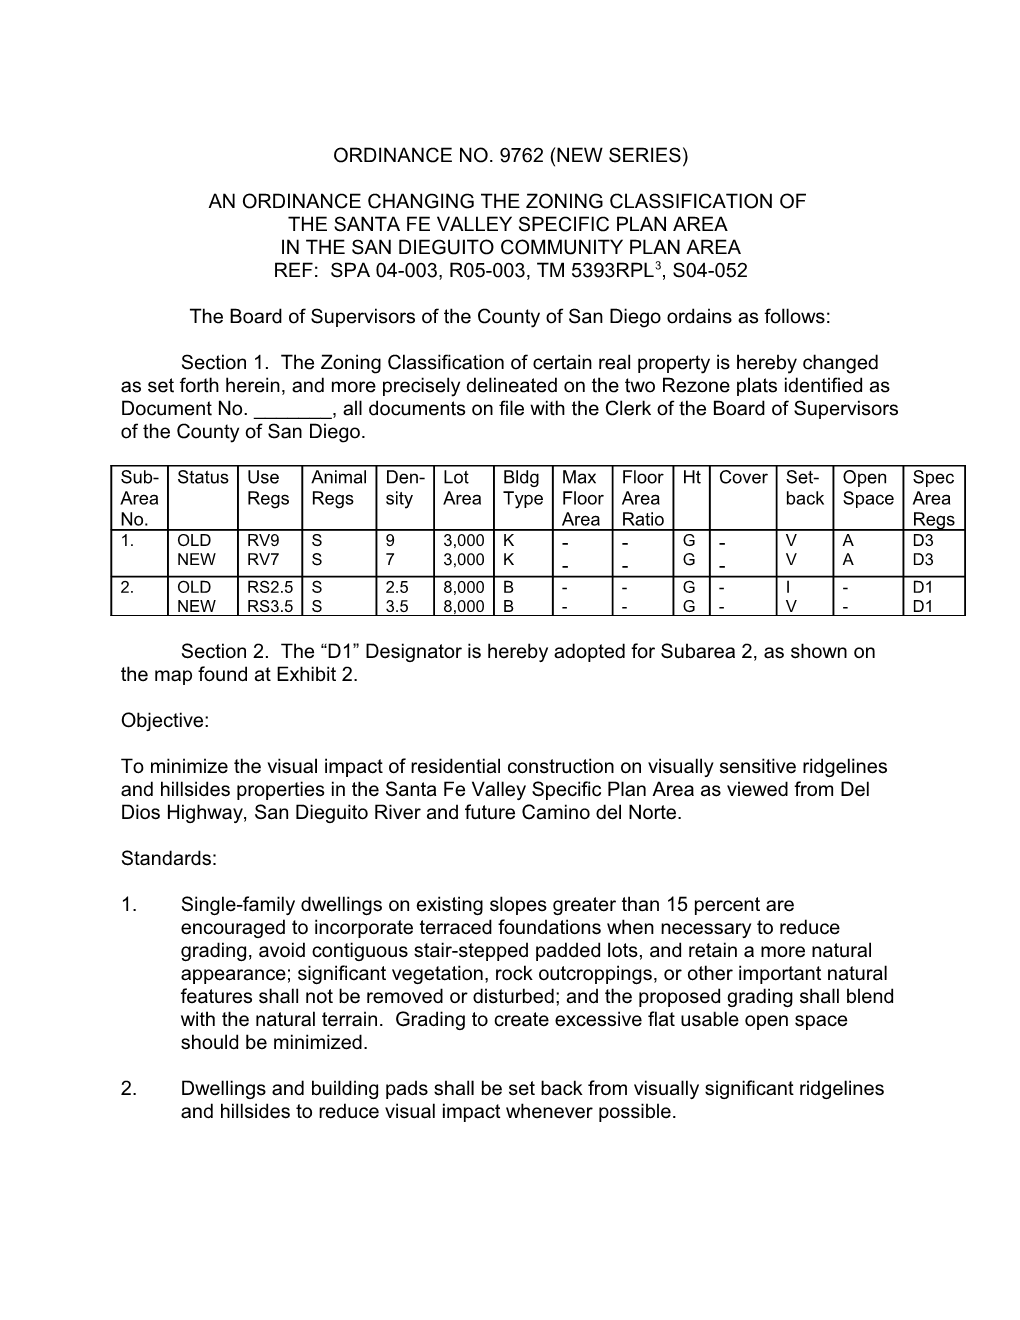 An Ordinance Changing the Zoning Classification Of